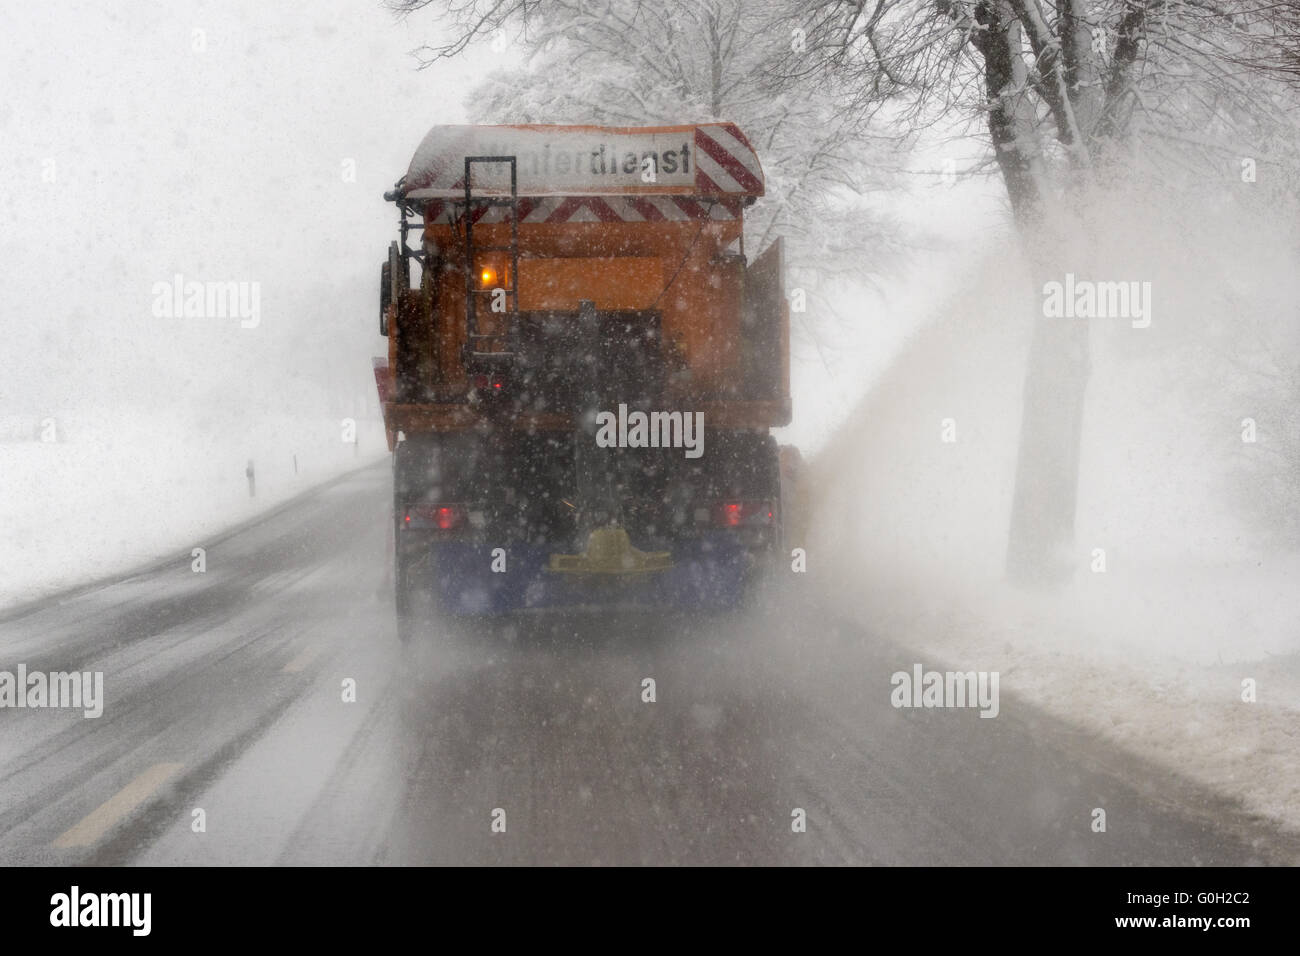 winter service with truck on road with snow Stock Photo